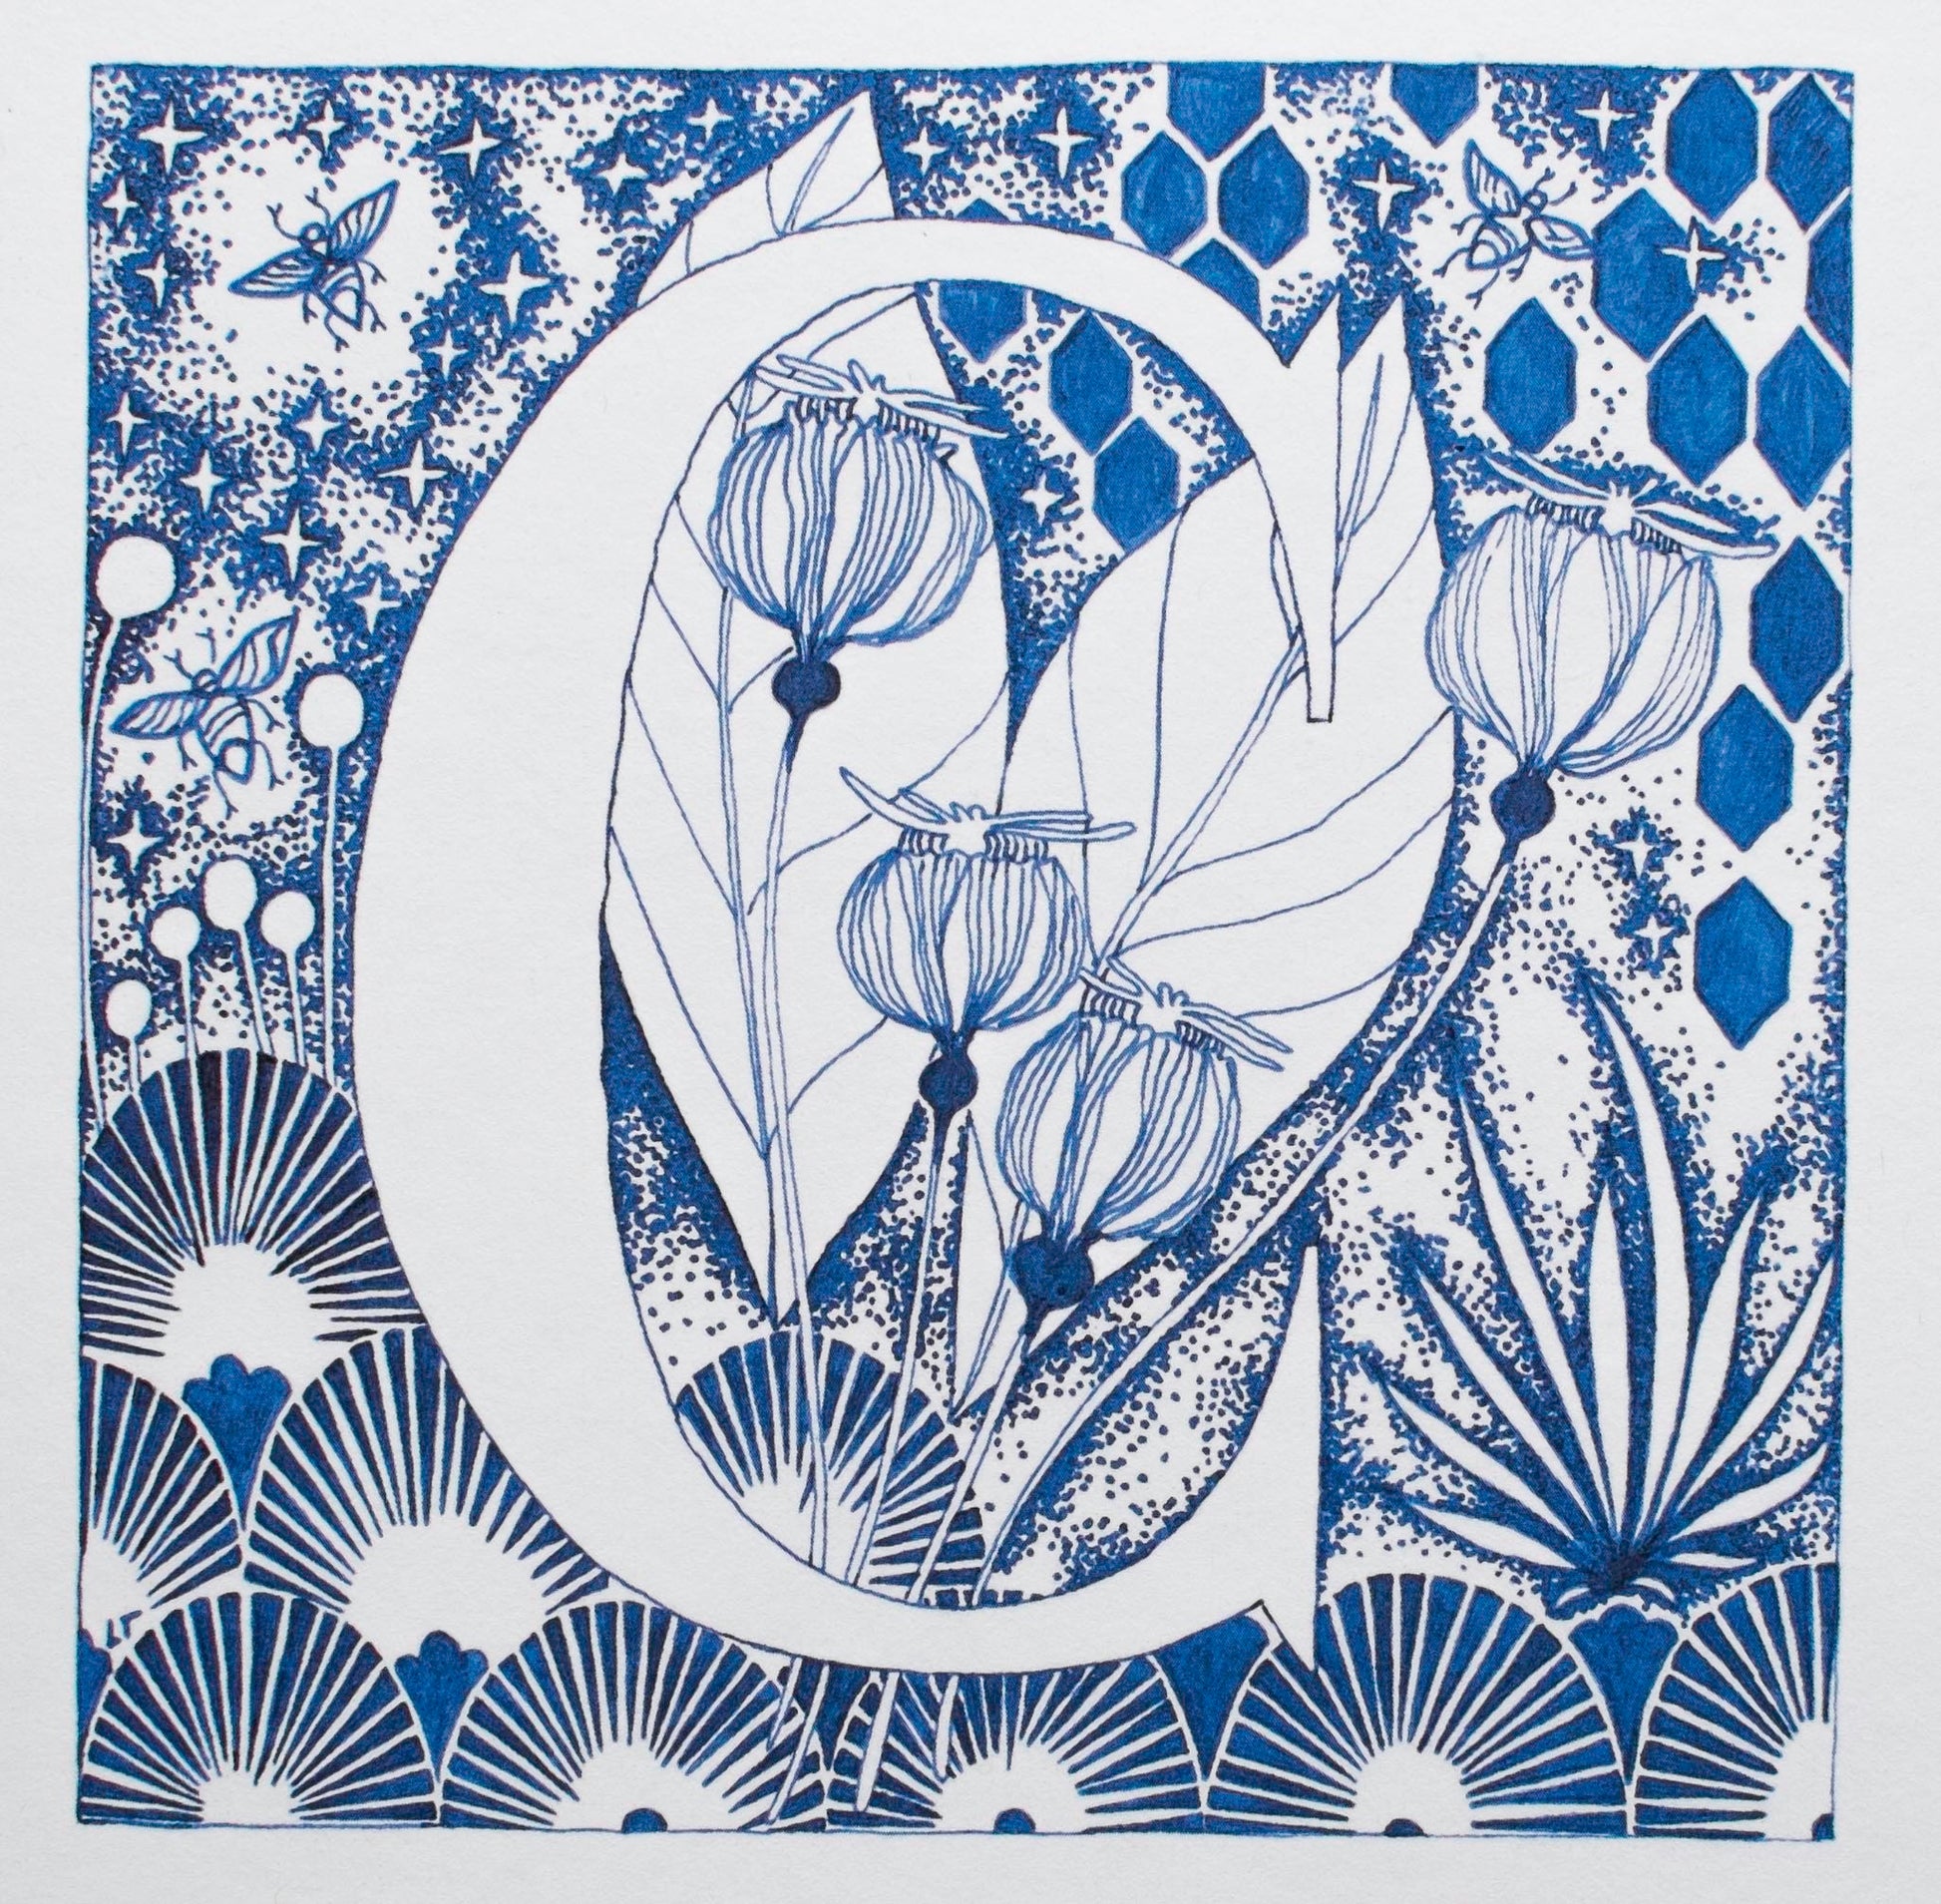 Limited Edition Print of Monogram C, letter print, blue ink, floral, insects details, enluminure, miniature, laurateodoriart